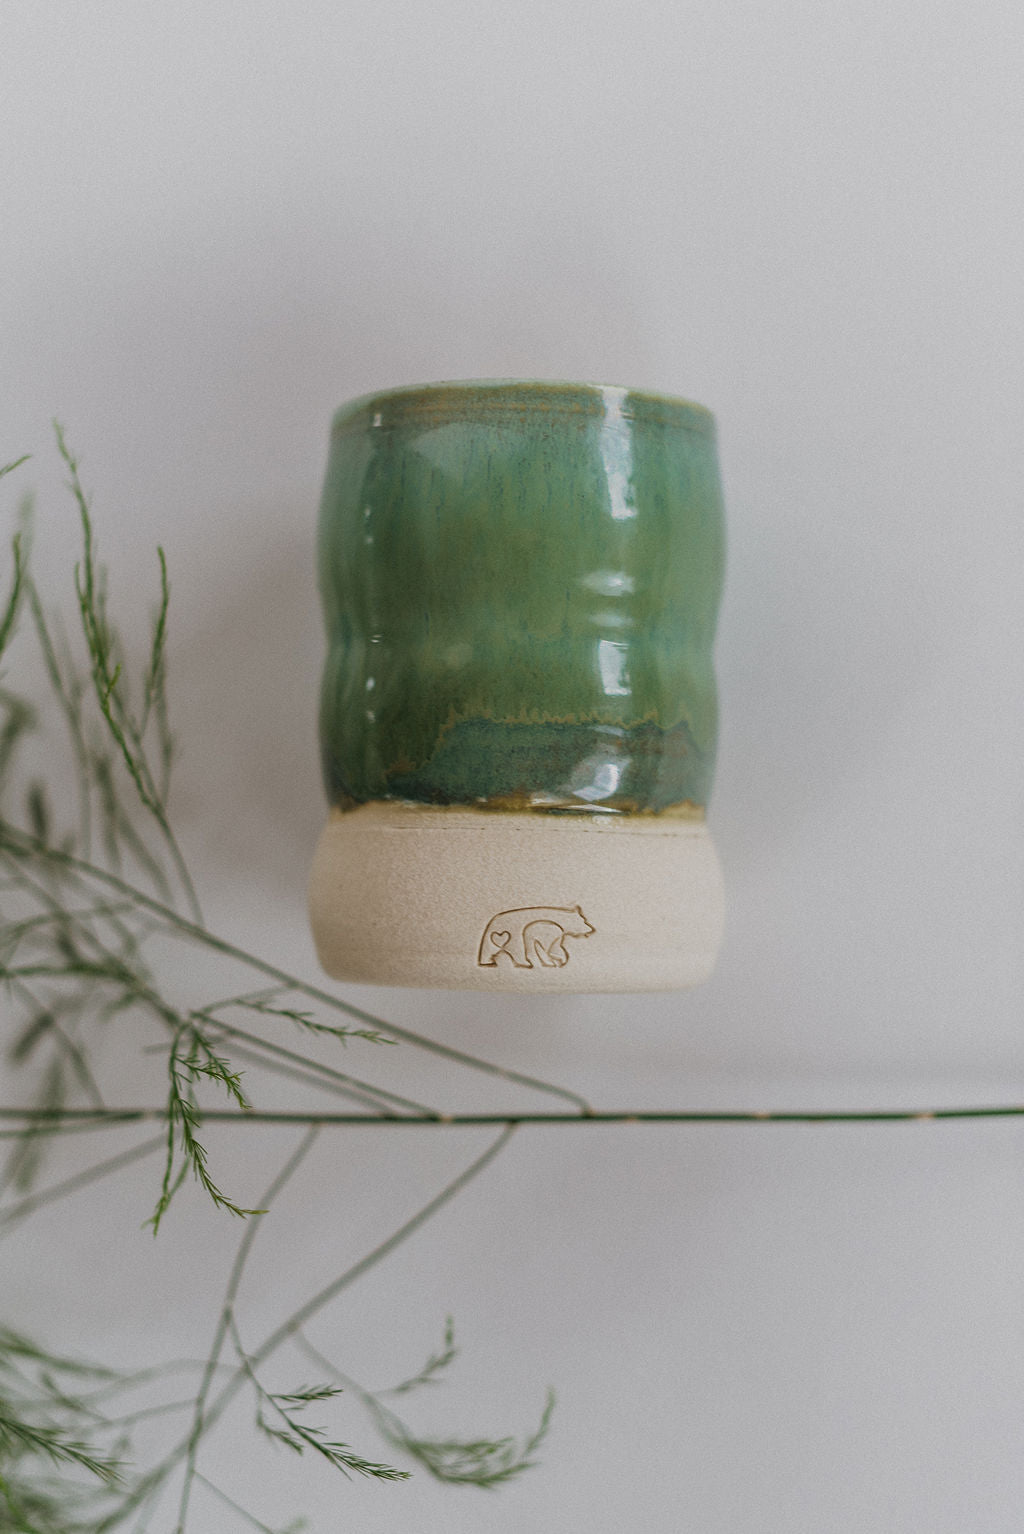 A green ceramic candle vessel with the wick and bear logo.